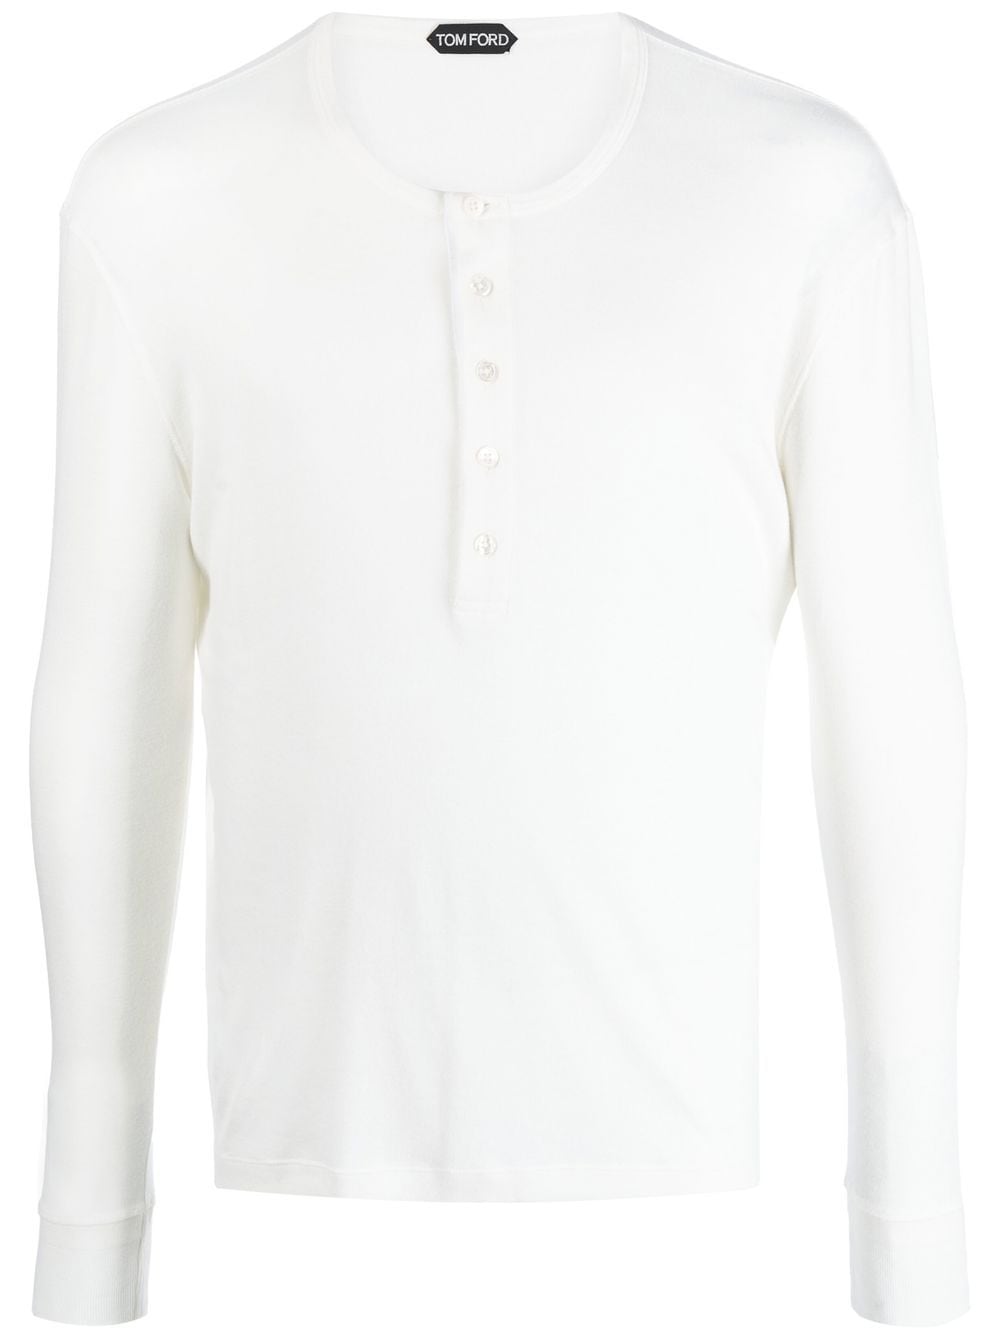 TOM FORD long-sleeved round-neck T-shirt - Farfetch